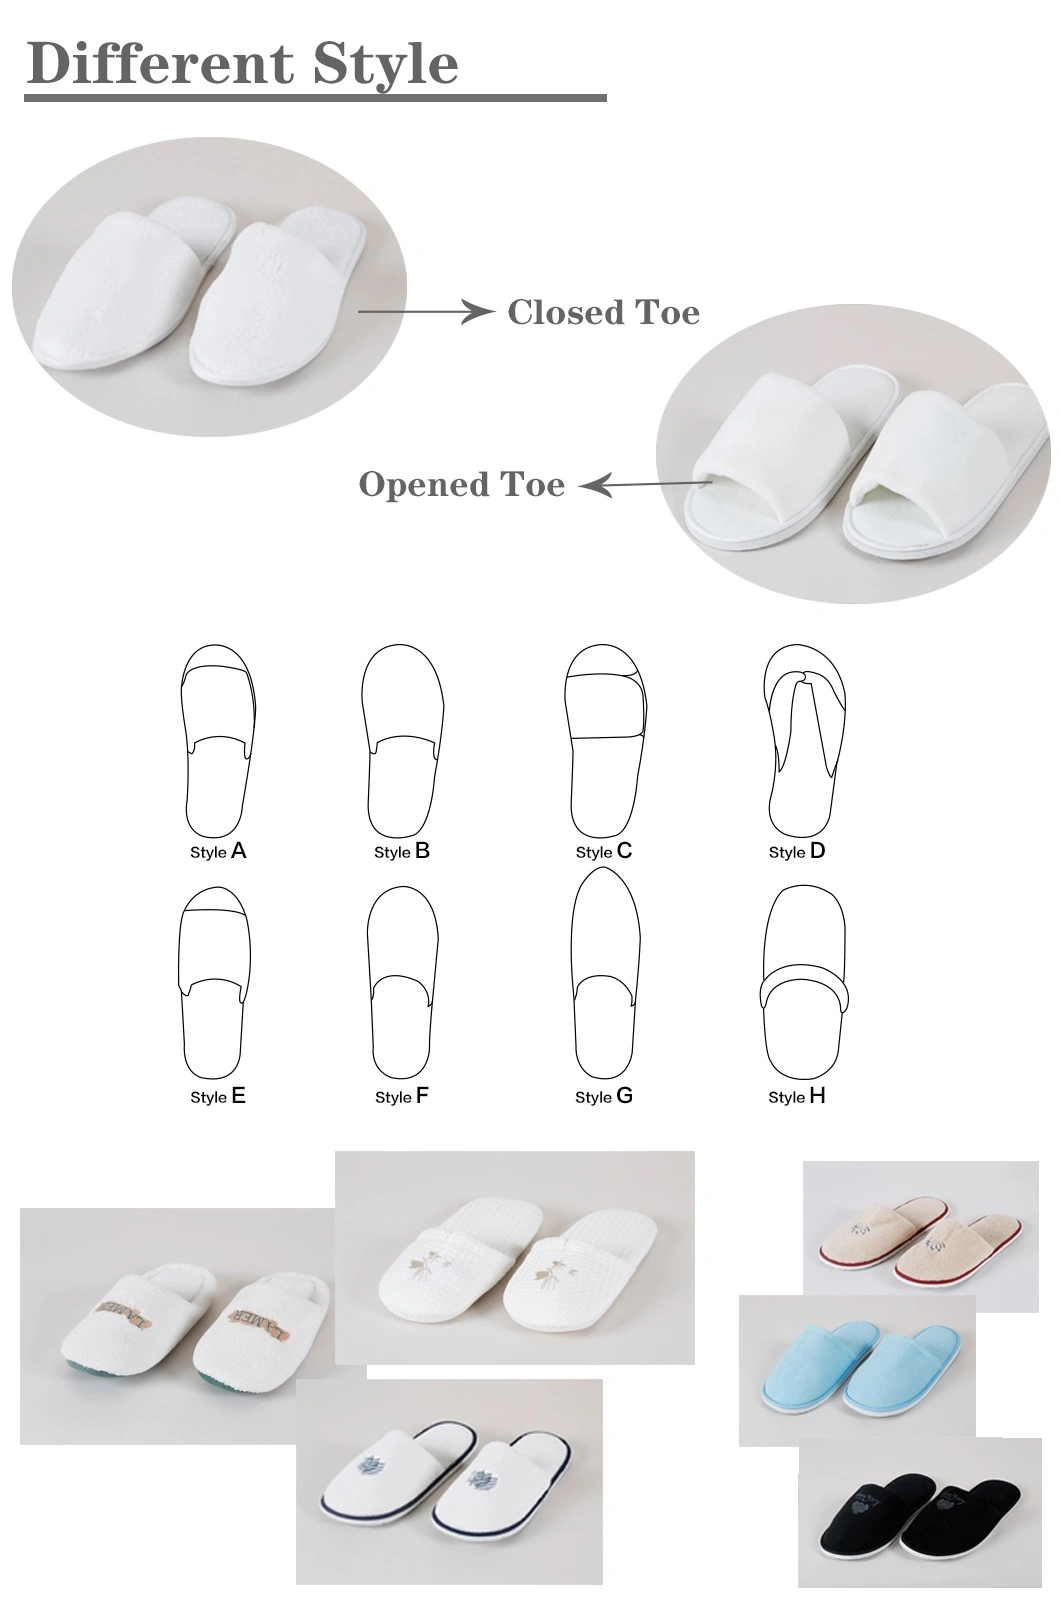 Hotel Supplies Amenities Close Toe Disposable Brown Hotel SPA Shoes Linen Cotton Slipperstype Slipper